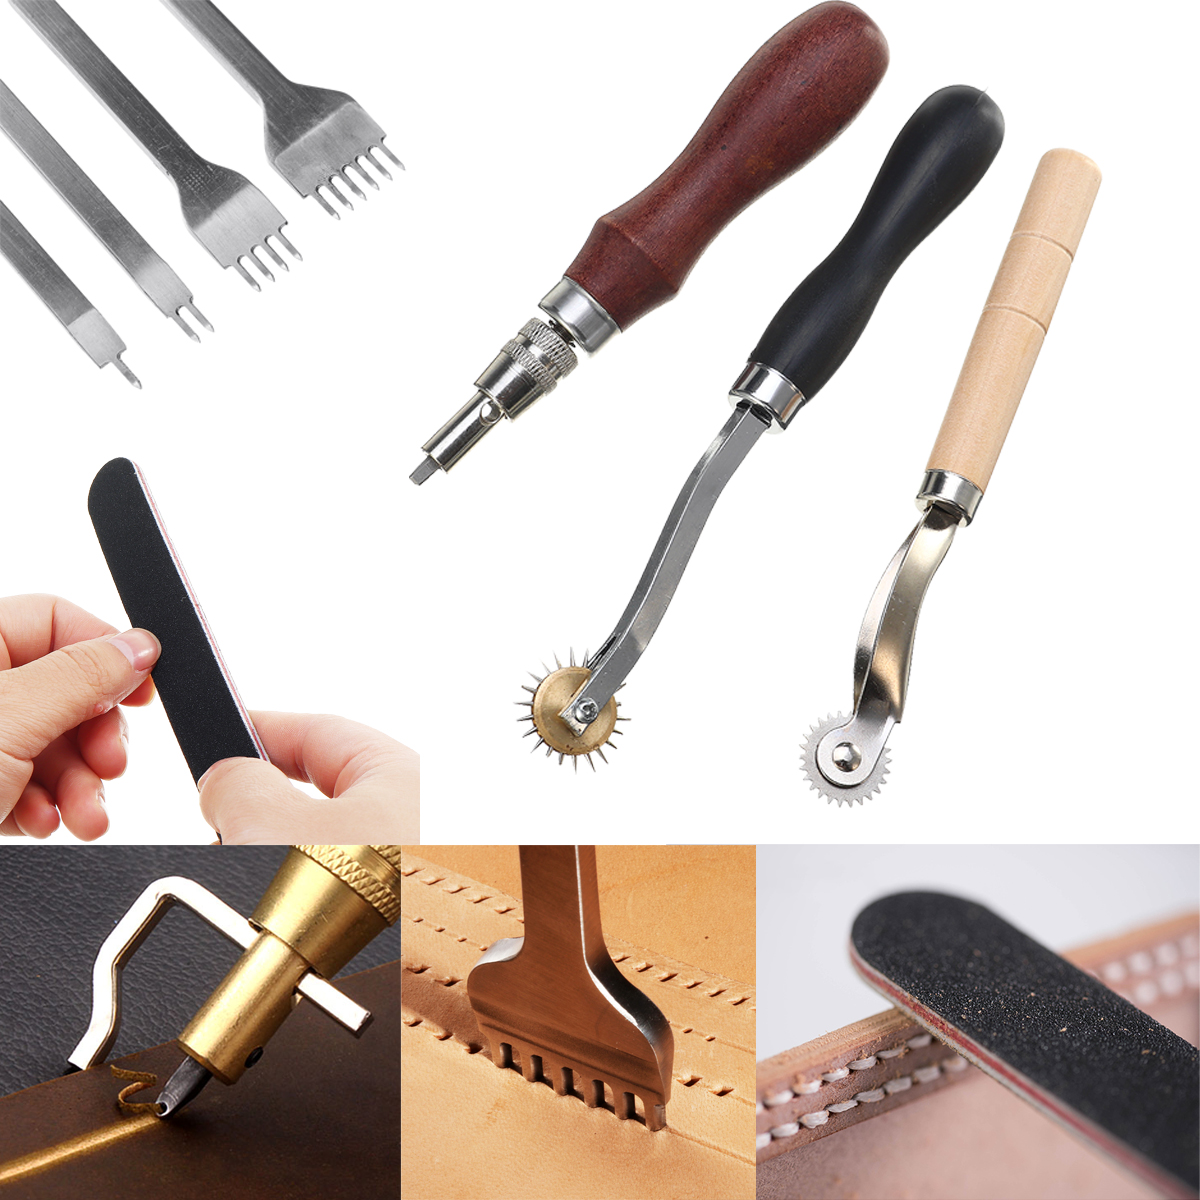 Leather-Sewing-Thread-Carving-DIY-Leather-Craft-Tools-Hand-Stitching-Kit-Set-1693486-2